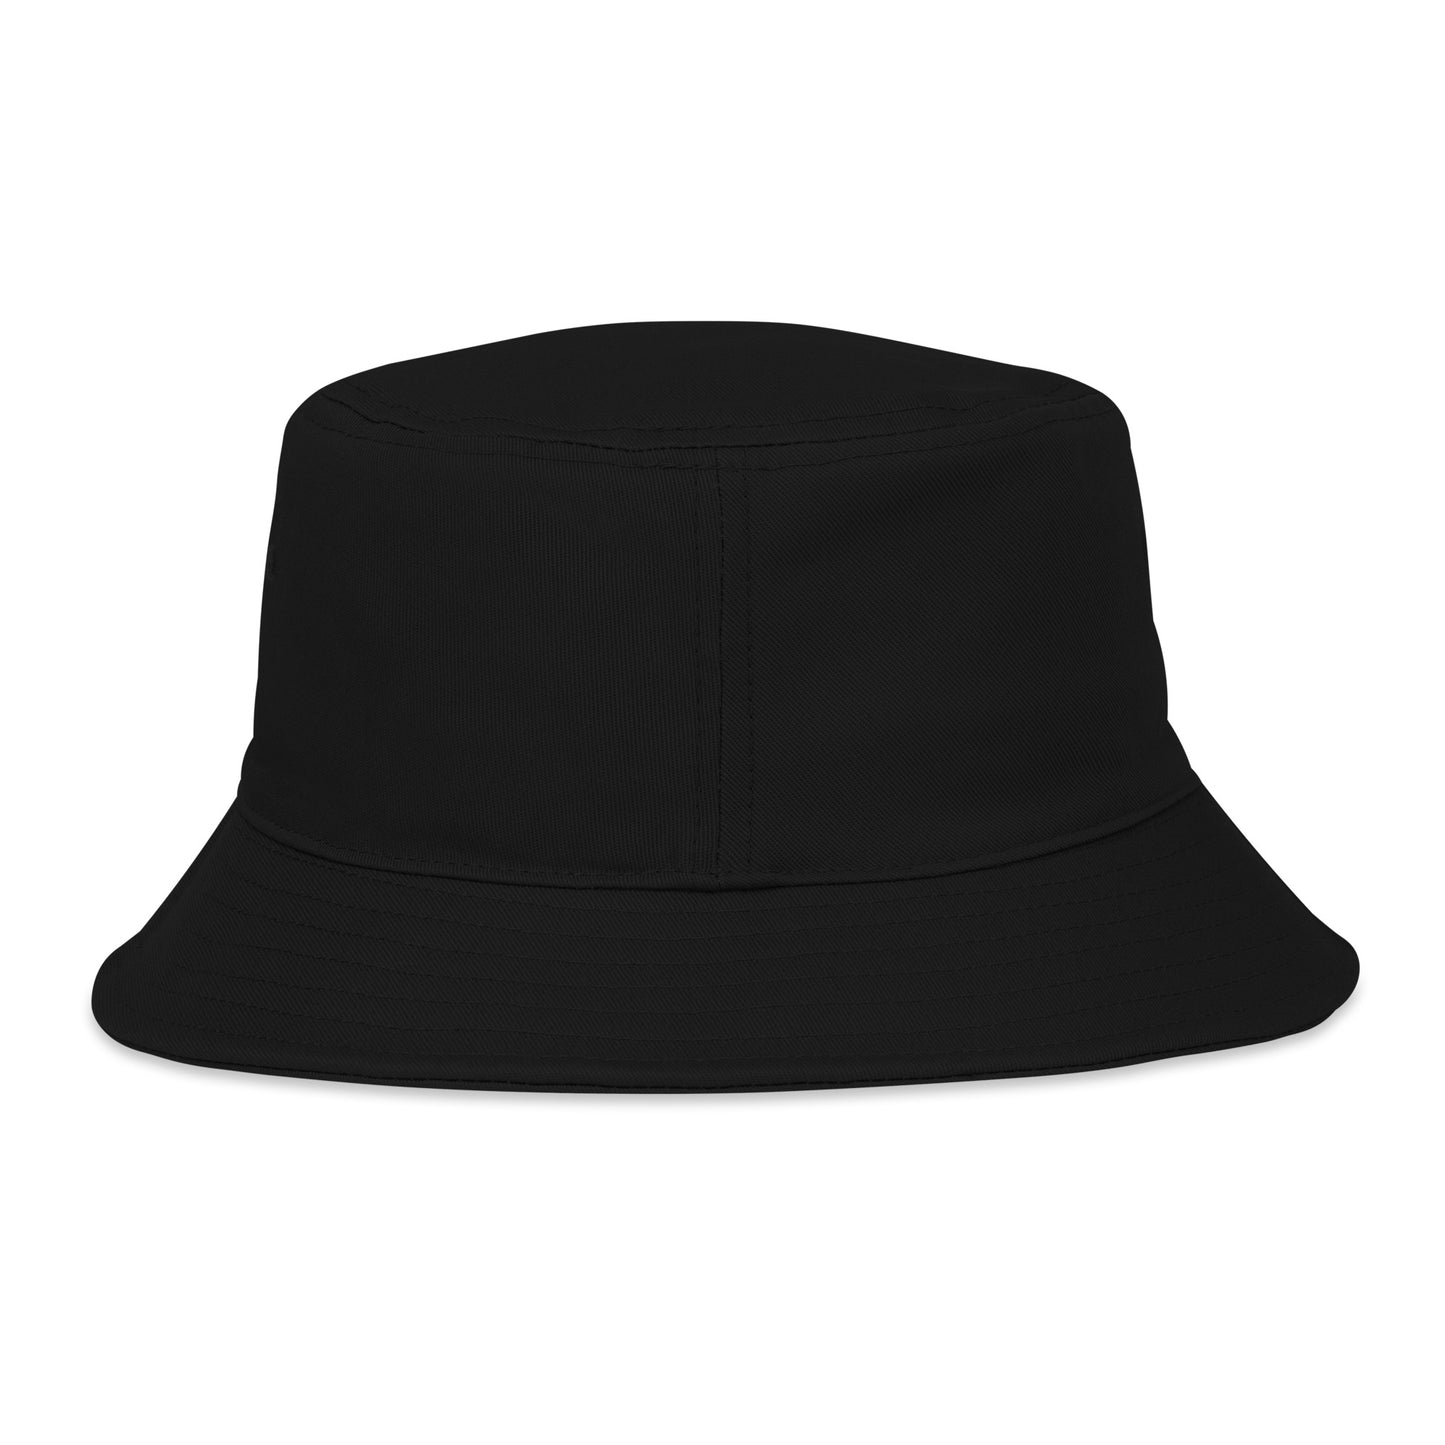 I LOVE THIS GAME BUCKET HAT